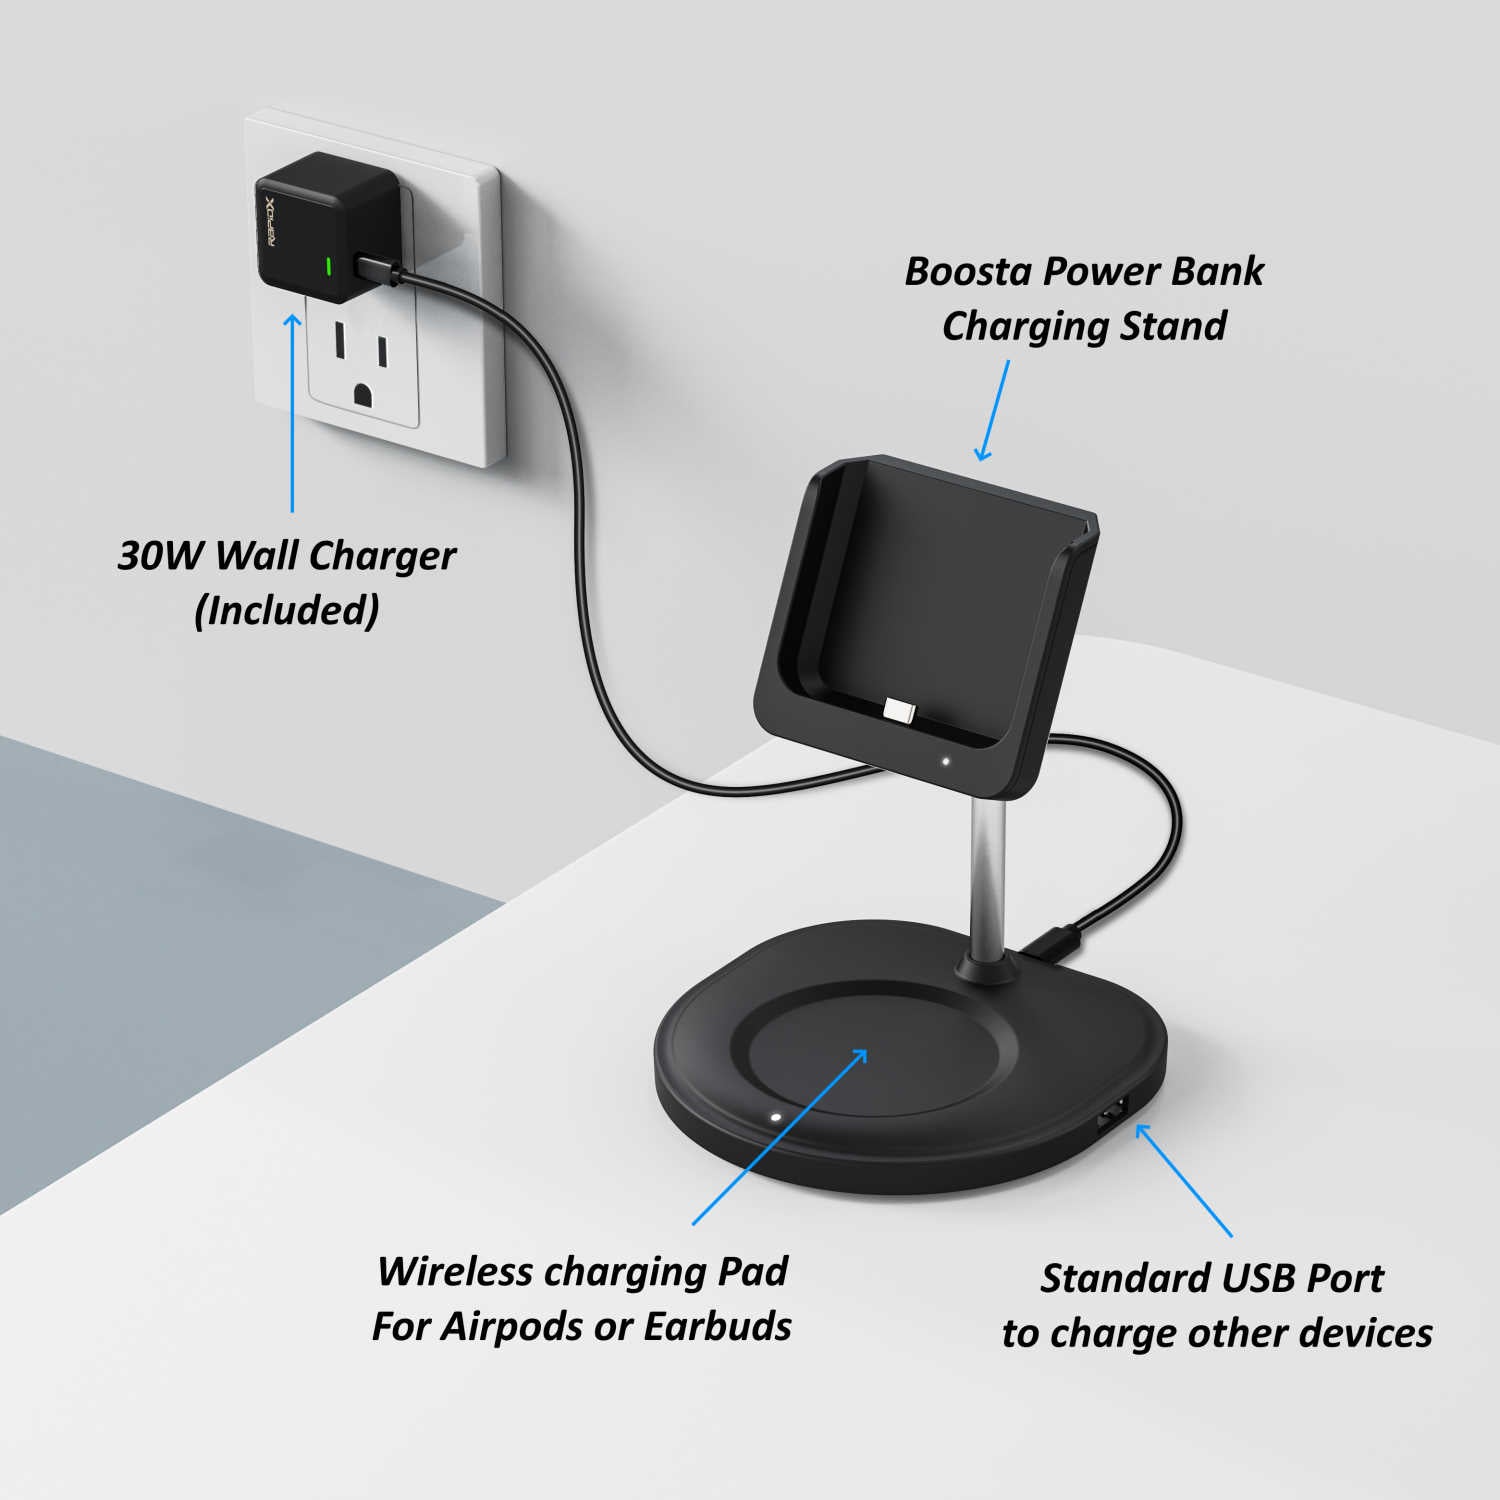 Charging Station for RapidX Boosta Power Bank and AirPods